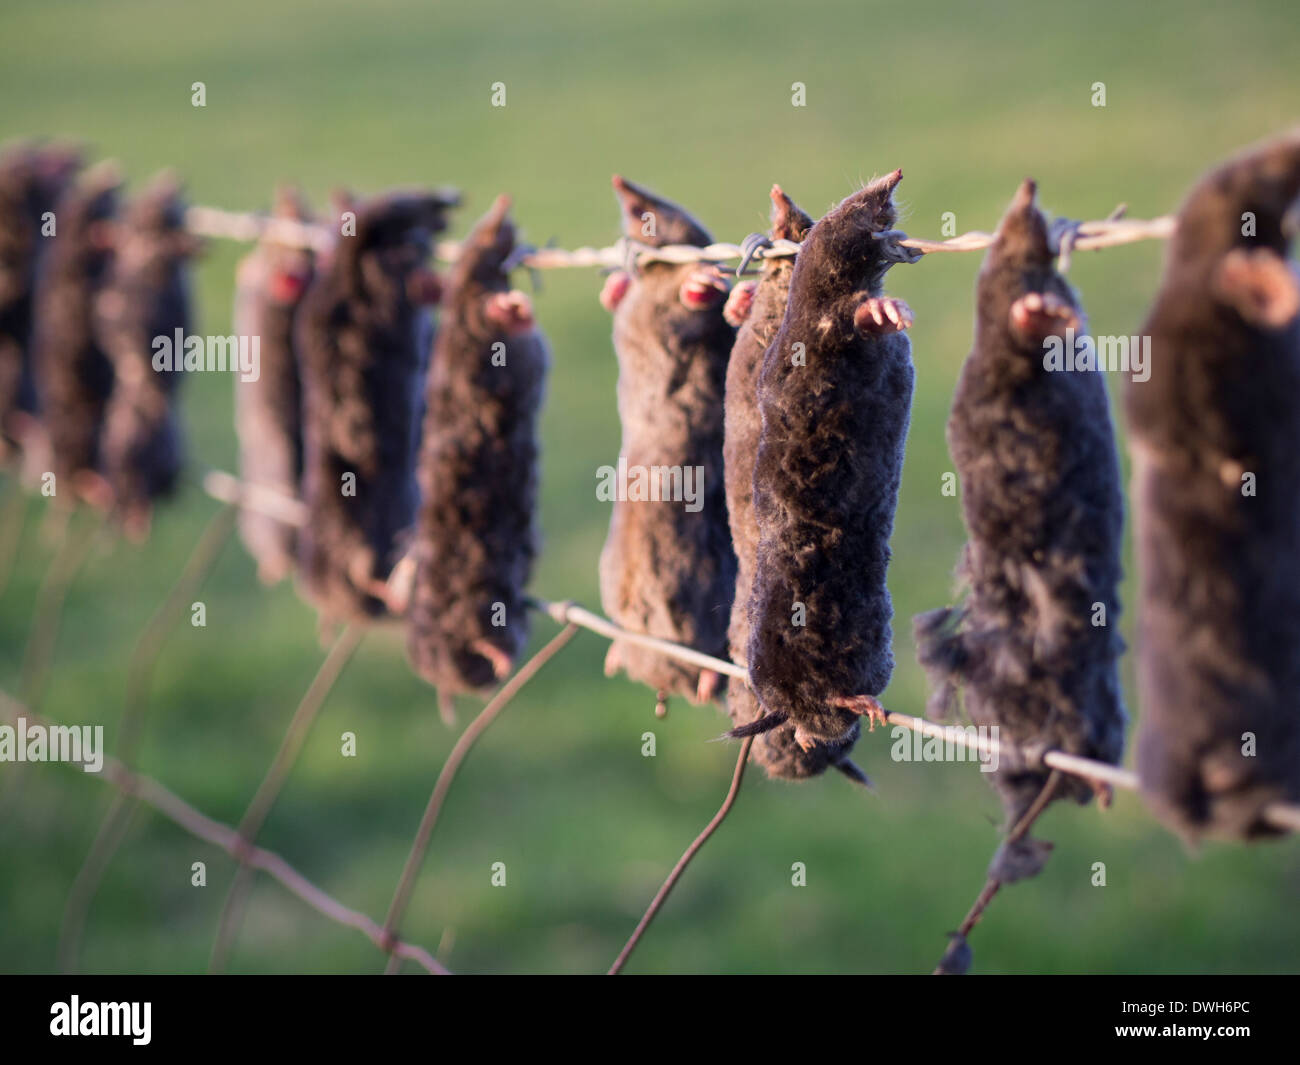 Dead Moles Hanging from a Fence Stock Photo